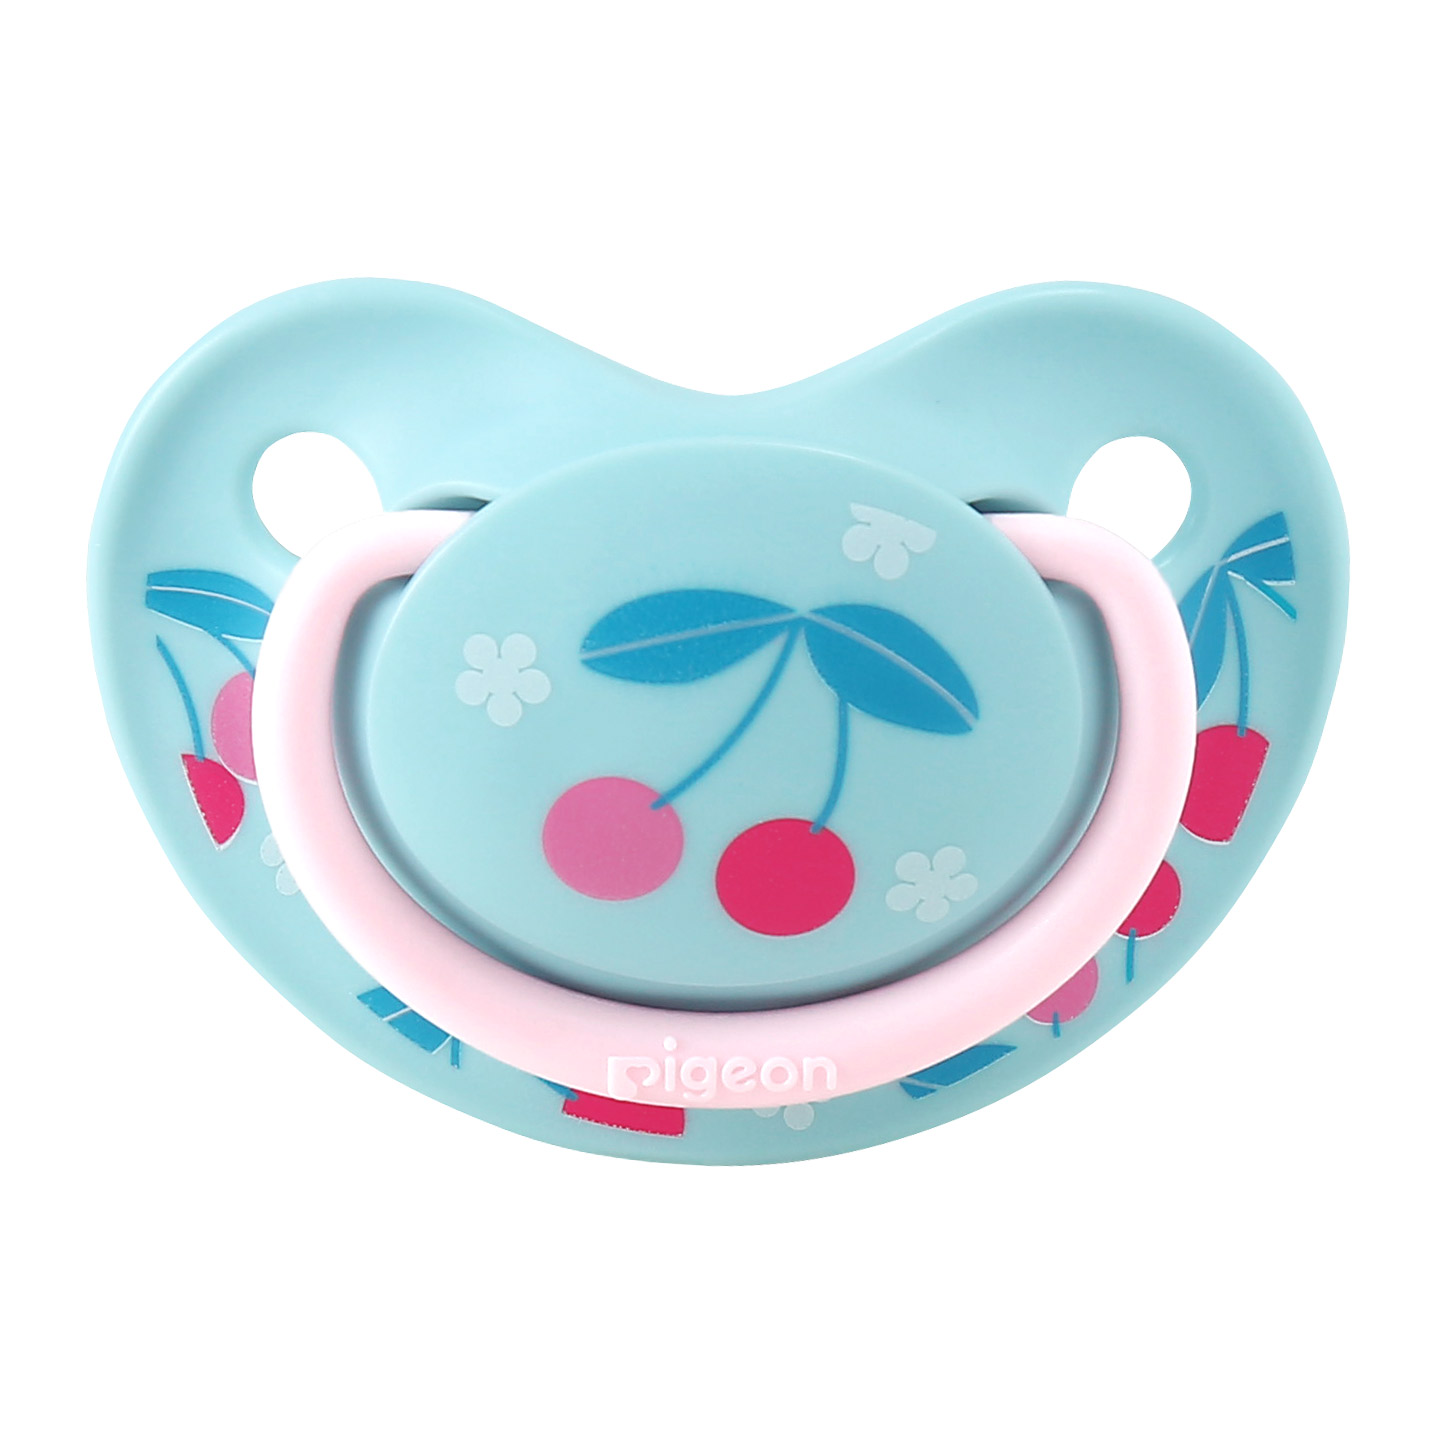 Pigeon Soother Funfriends L Size - Cherry (JP) (PG-1018861)